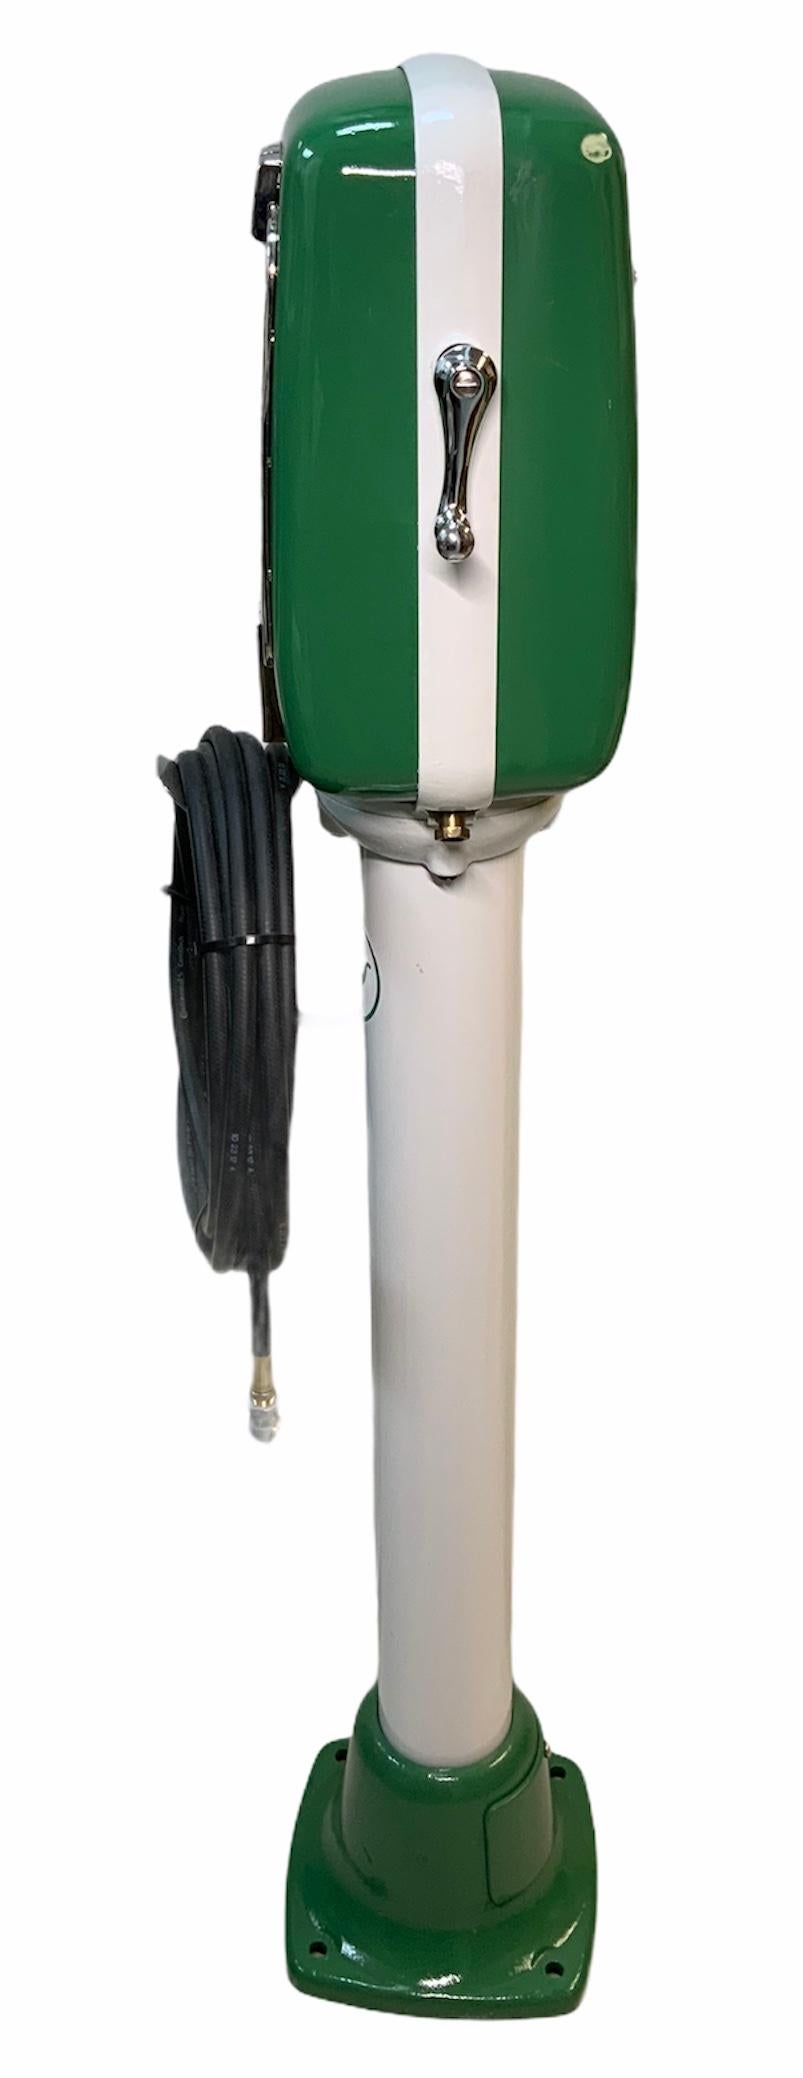 This is an Eco air meter model 98 pedestal mounted. It is painted in white & green because of the Sinclair Dino gasoline company. It meters the air. It operates by air pressure, not electricity. This model is no longer being made, but it was made by